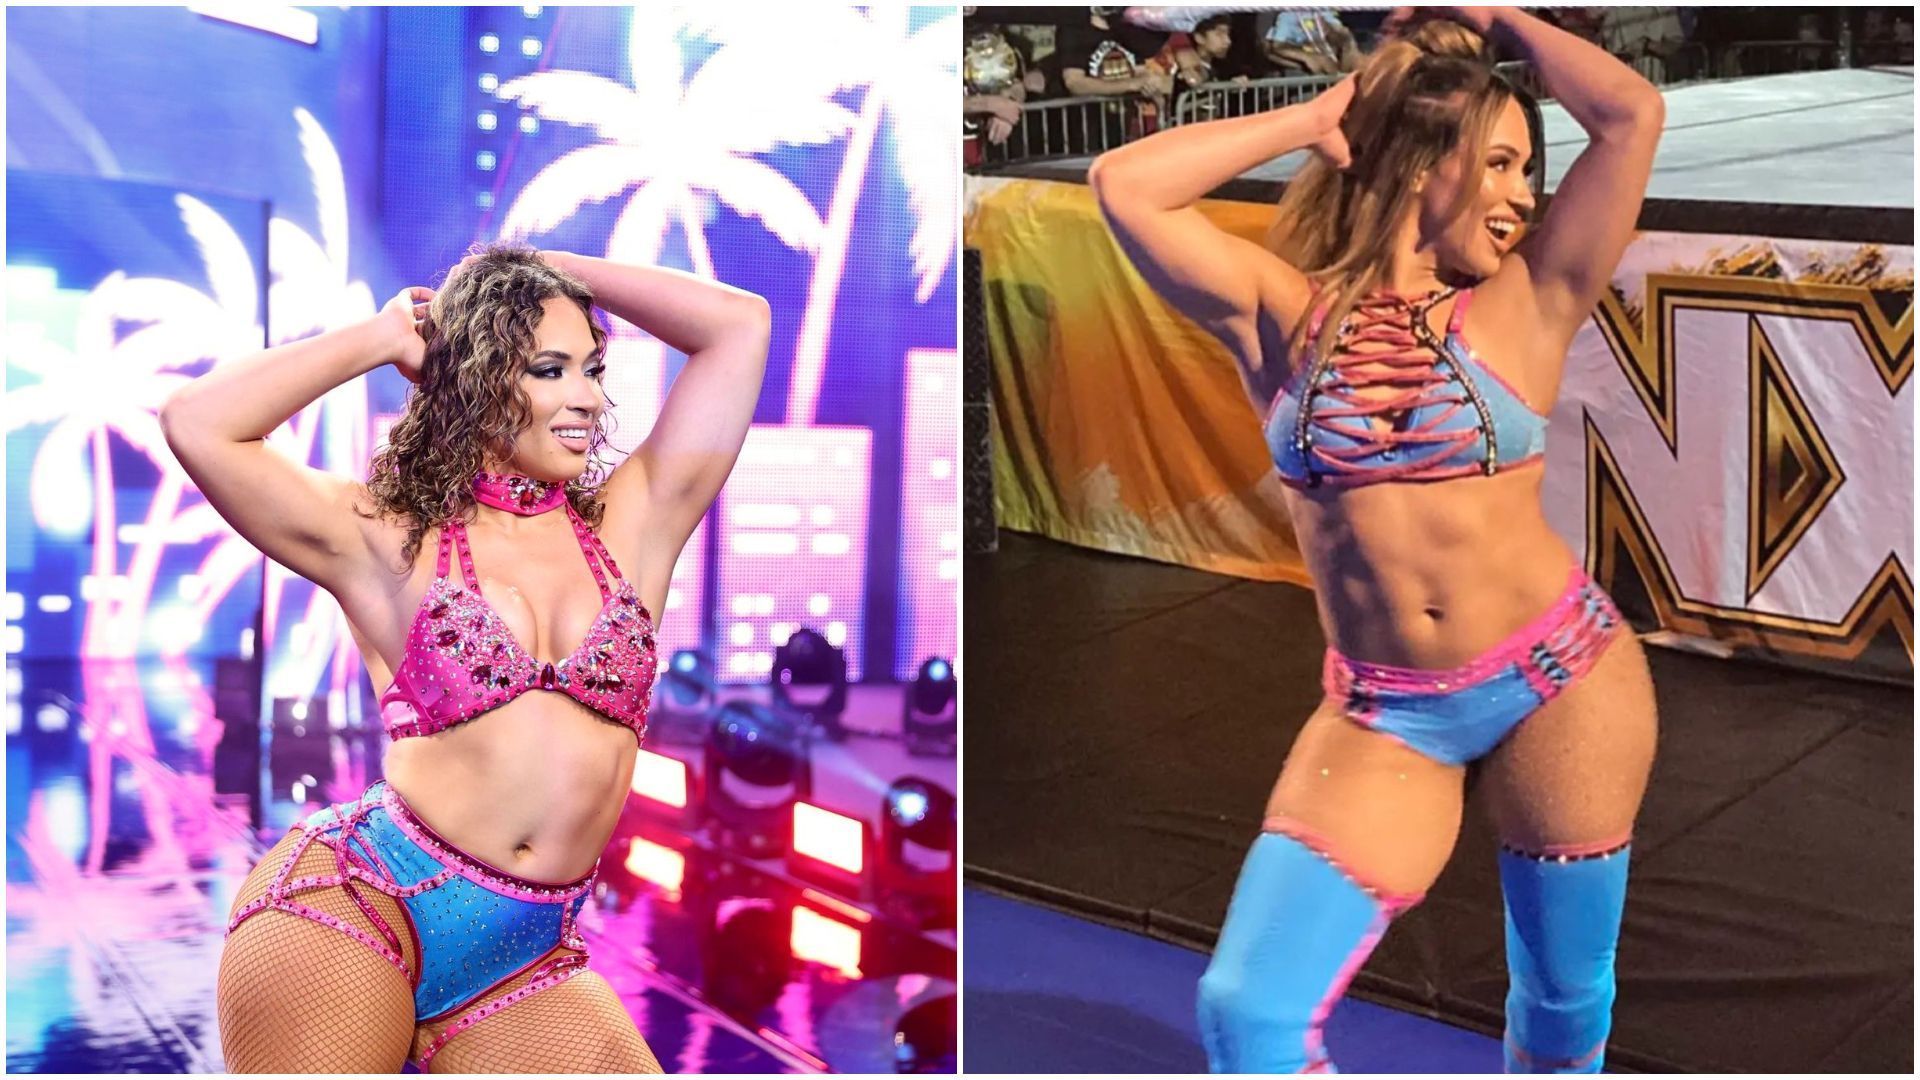 Lola Vice is a WWE NXT Superstar. [Image source: The star